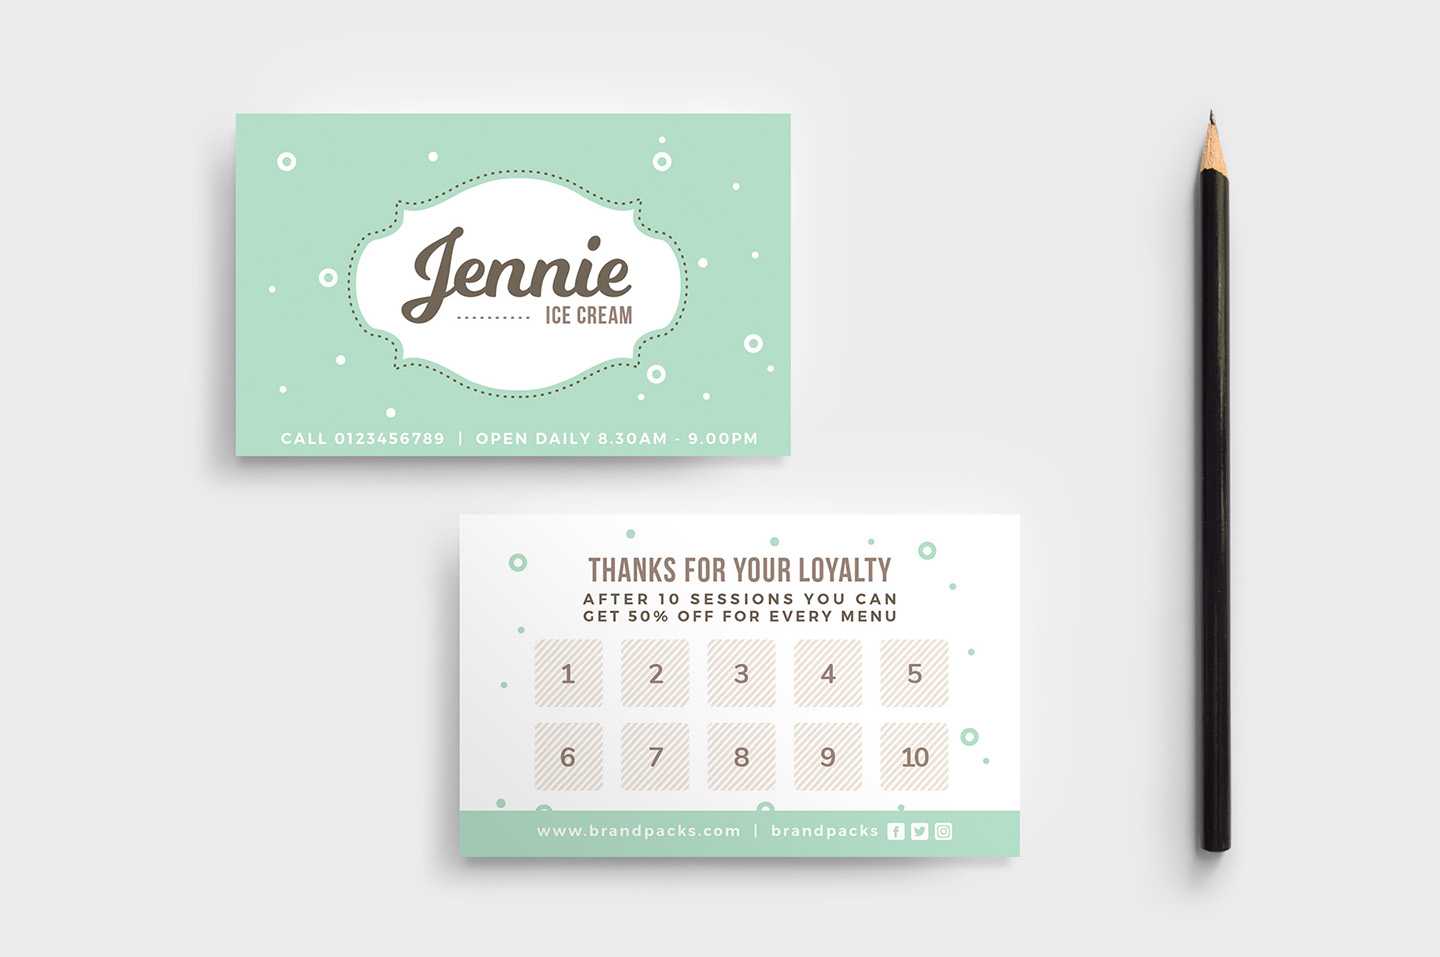 Free Loyalty Card Templates - Psd, Ai & Vector - Brandpacks In Loyalty Card Design Template